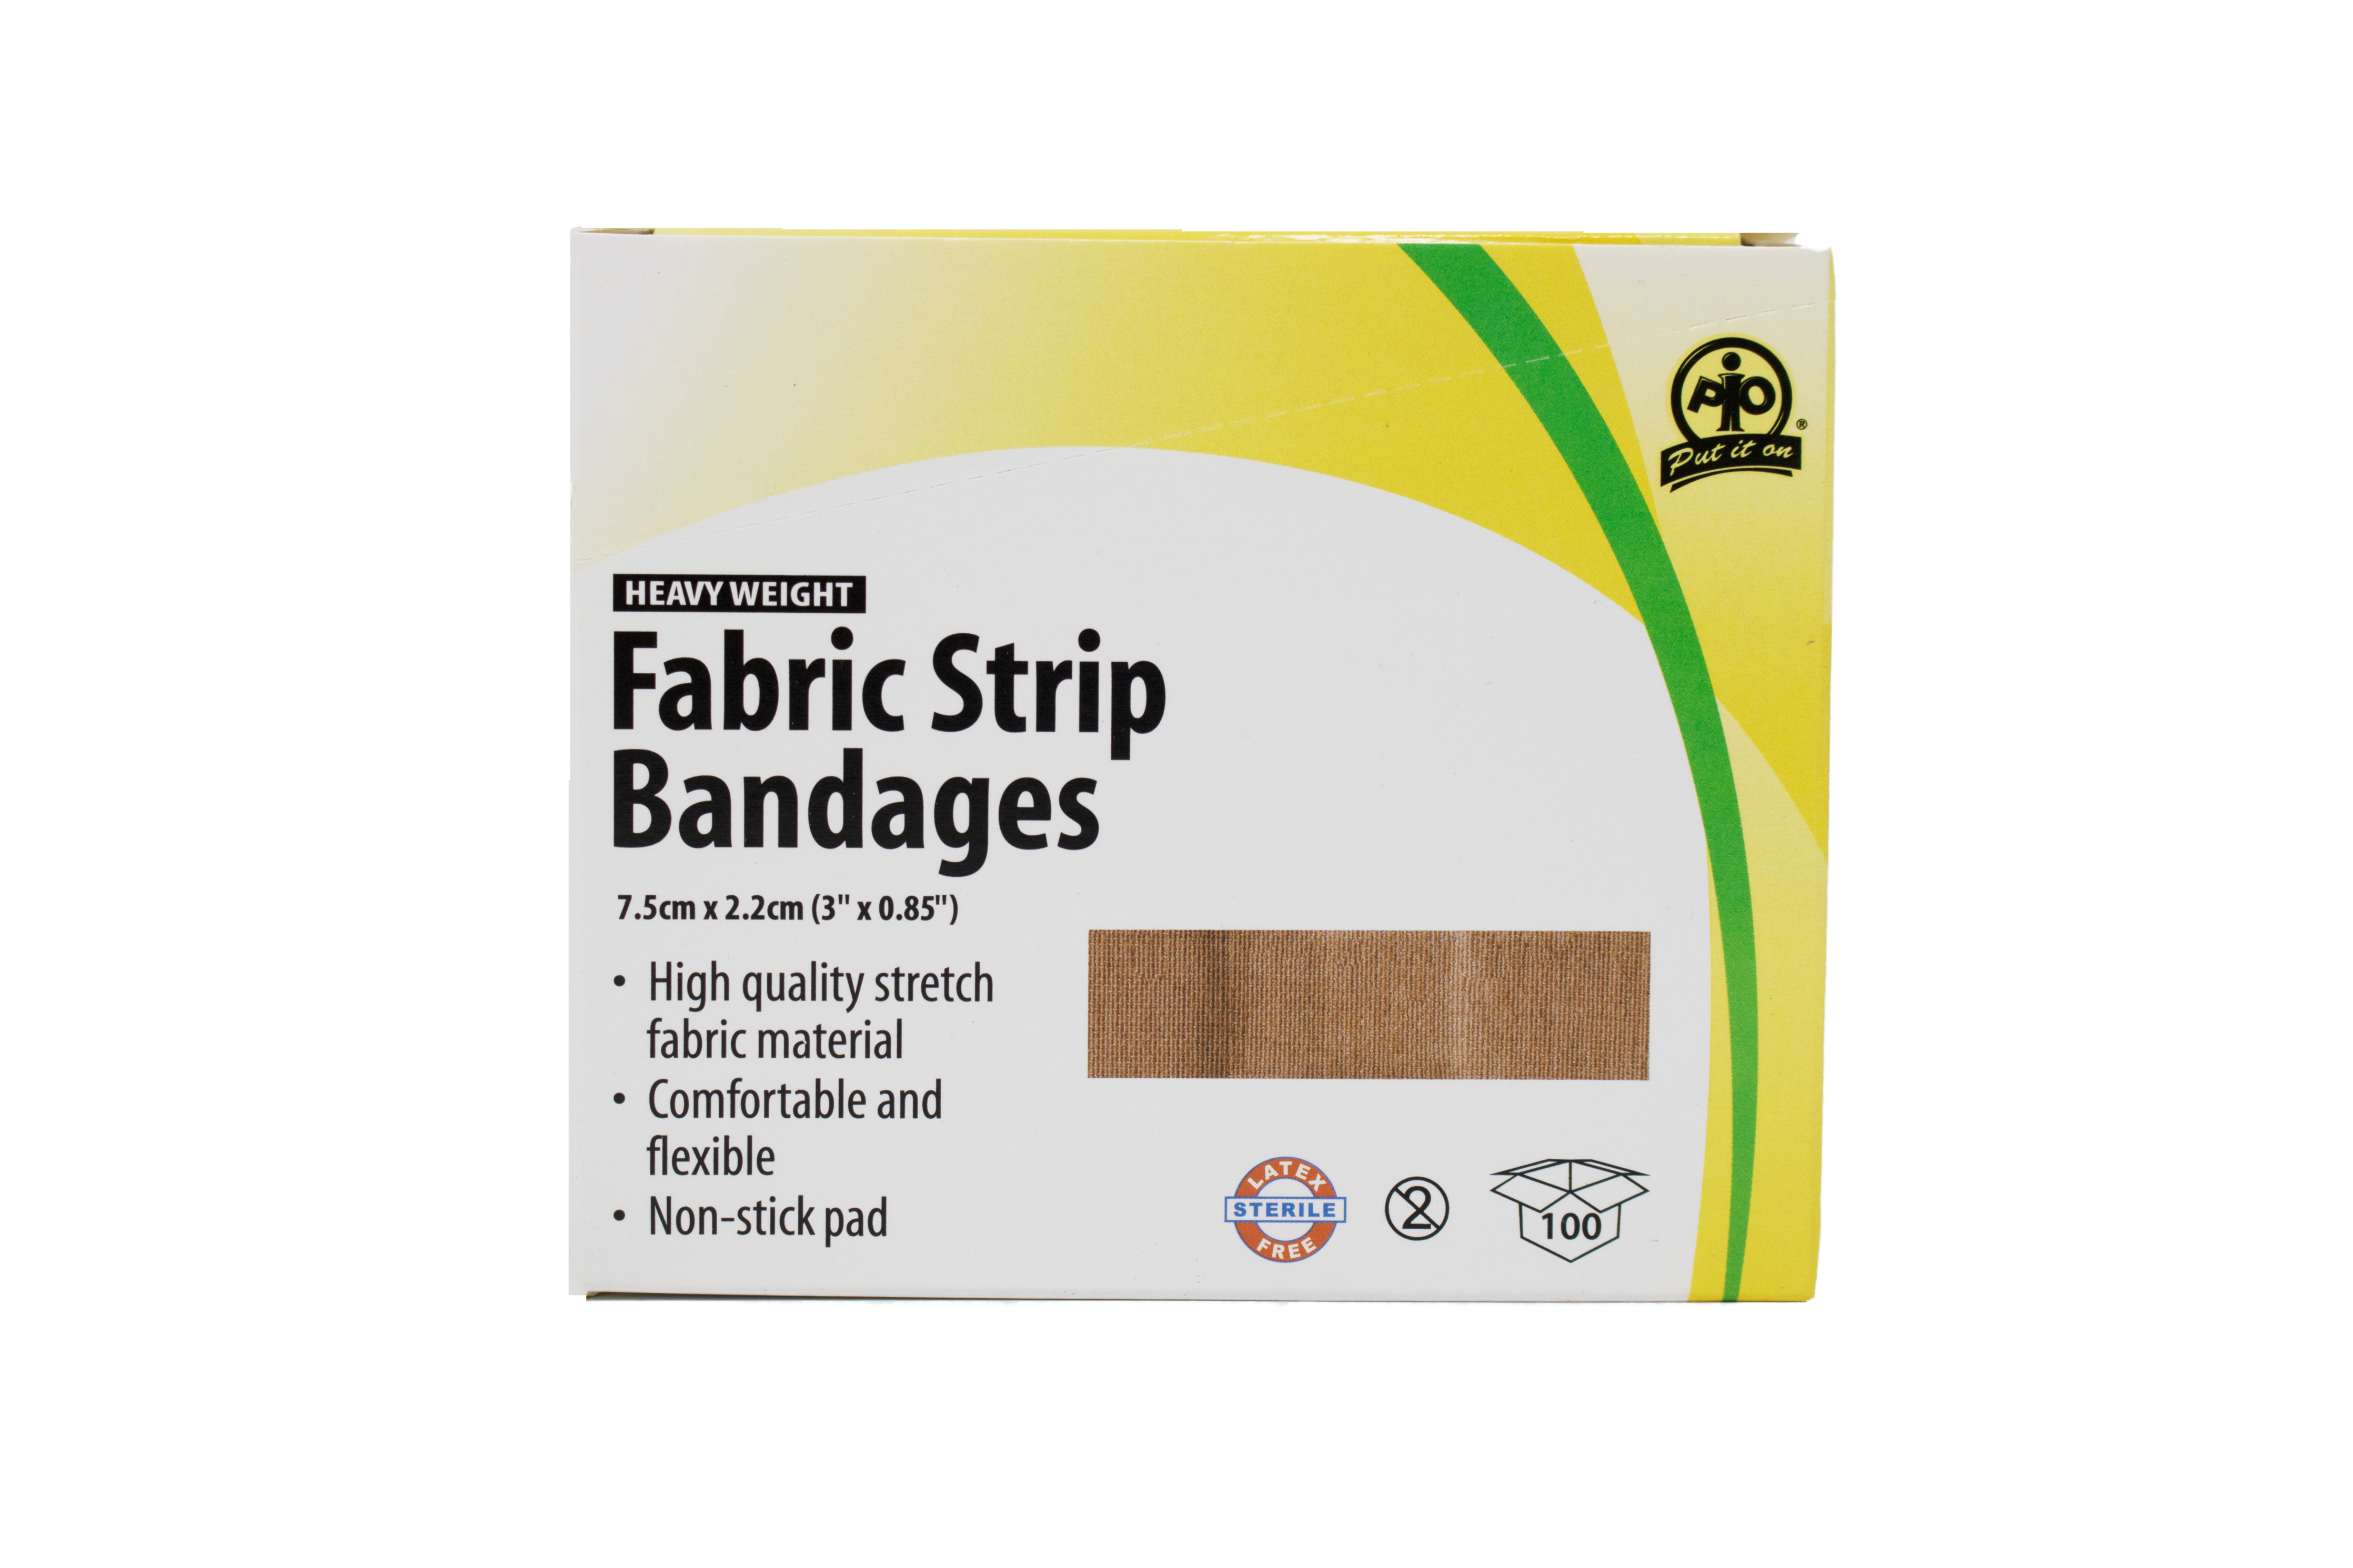 BAND-AID BRAND FABRIC BANDAGES ASSORTED 50/BOX - First Aid Direct